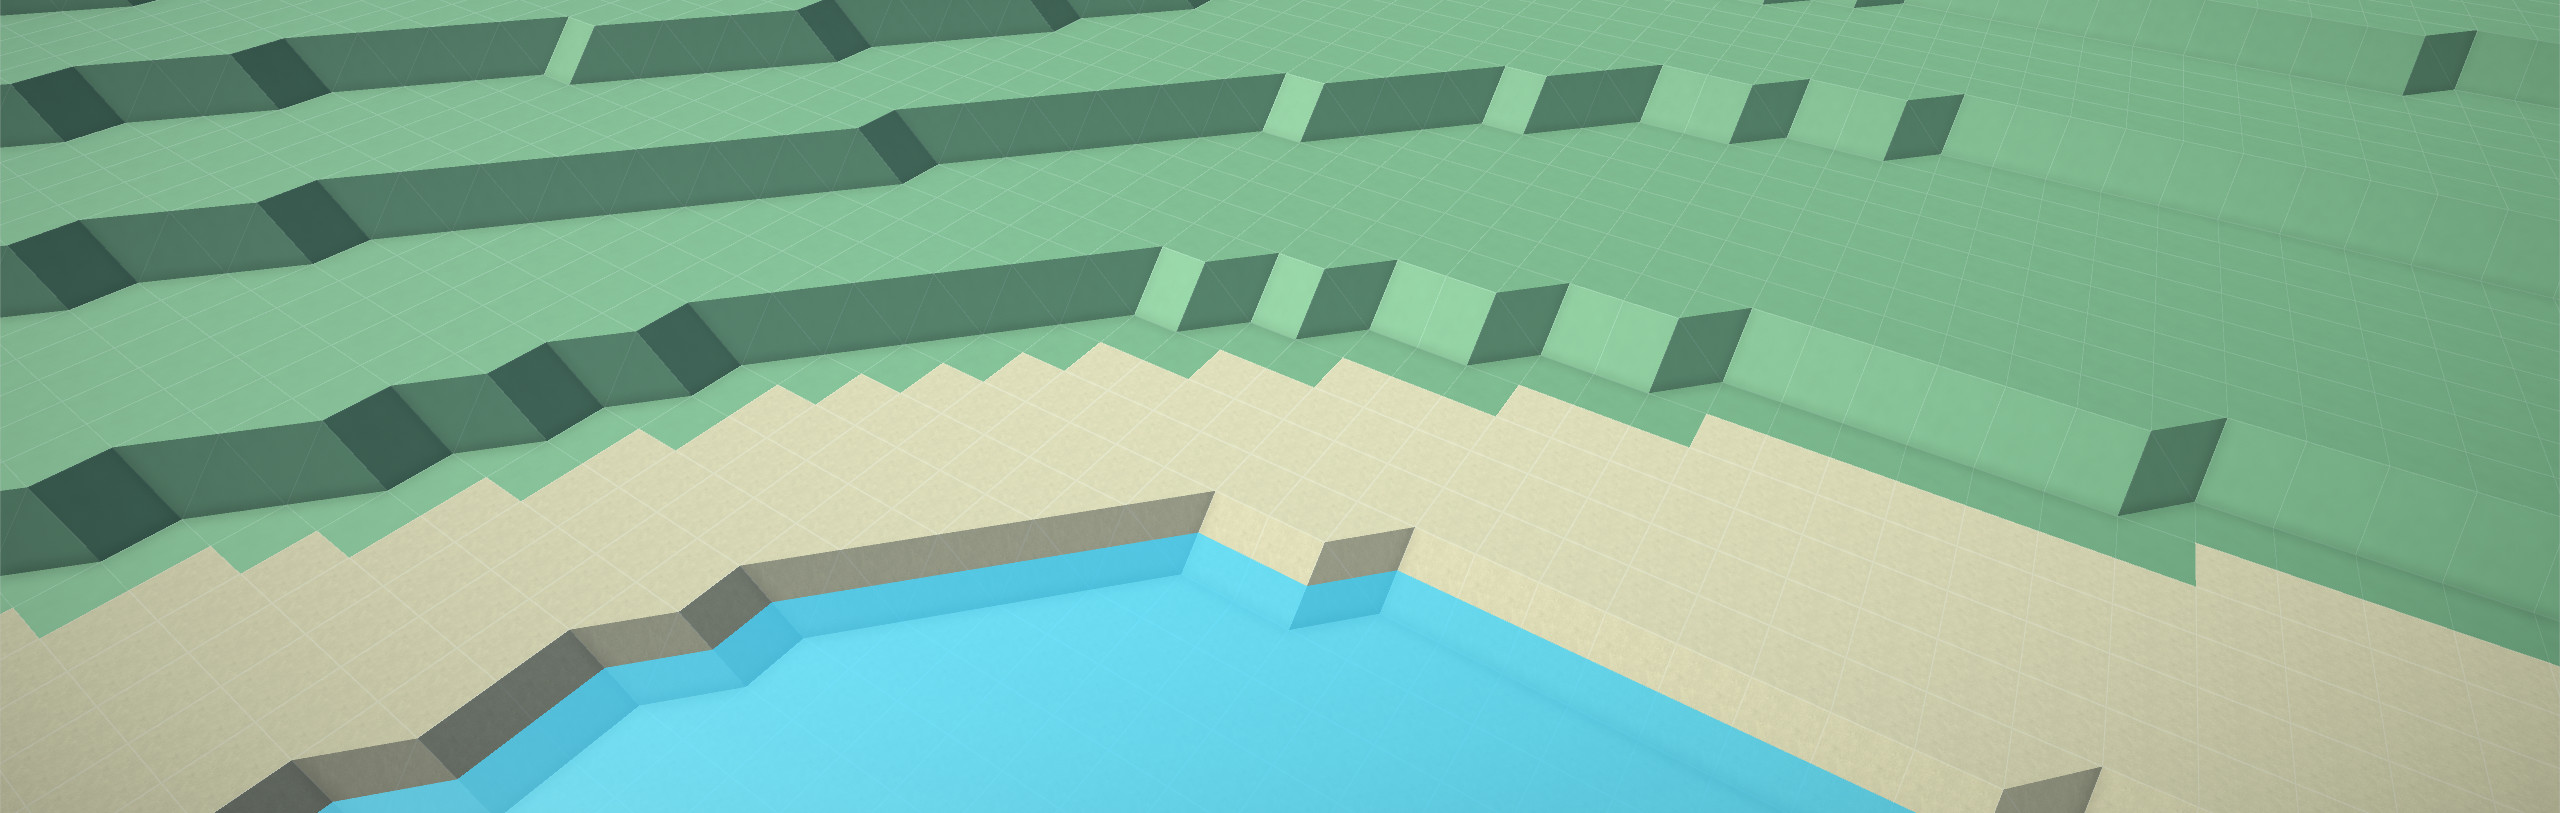 Tycoon Tile The Terrain Solution For Your Tycoon Game Unity Forum